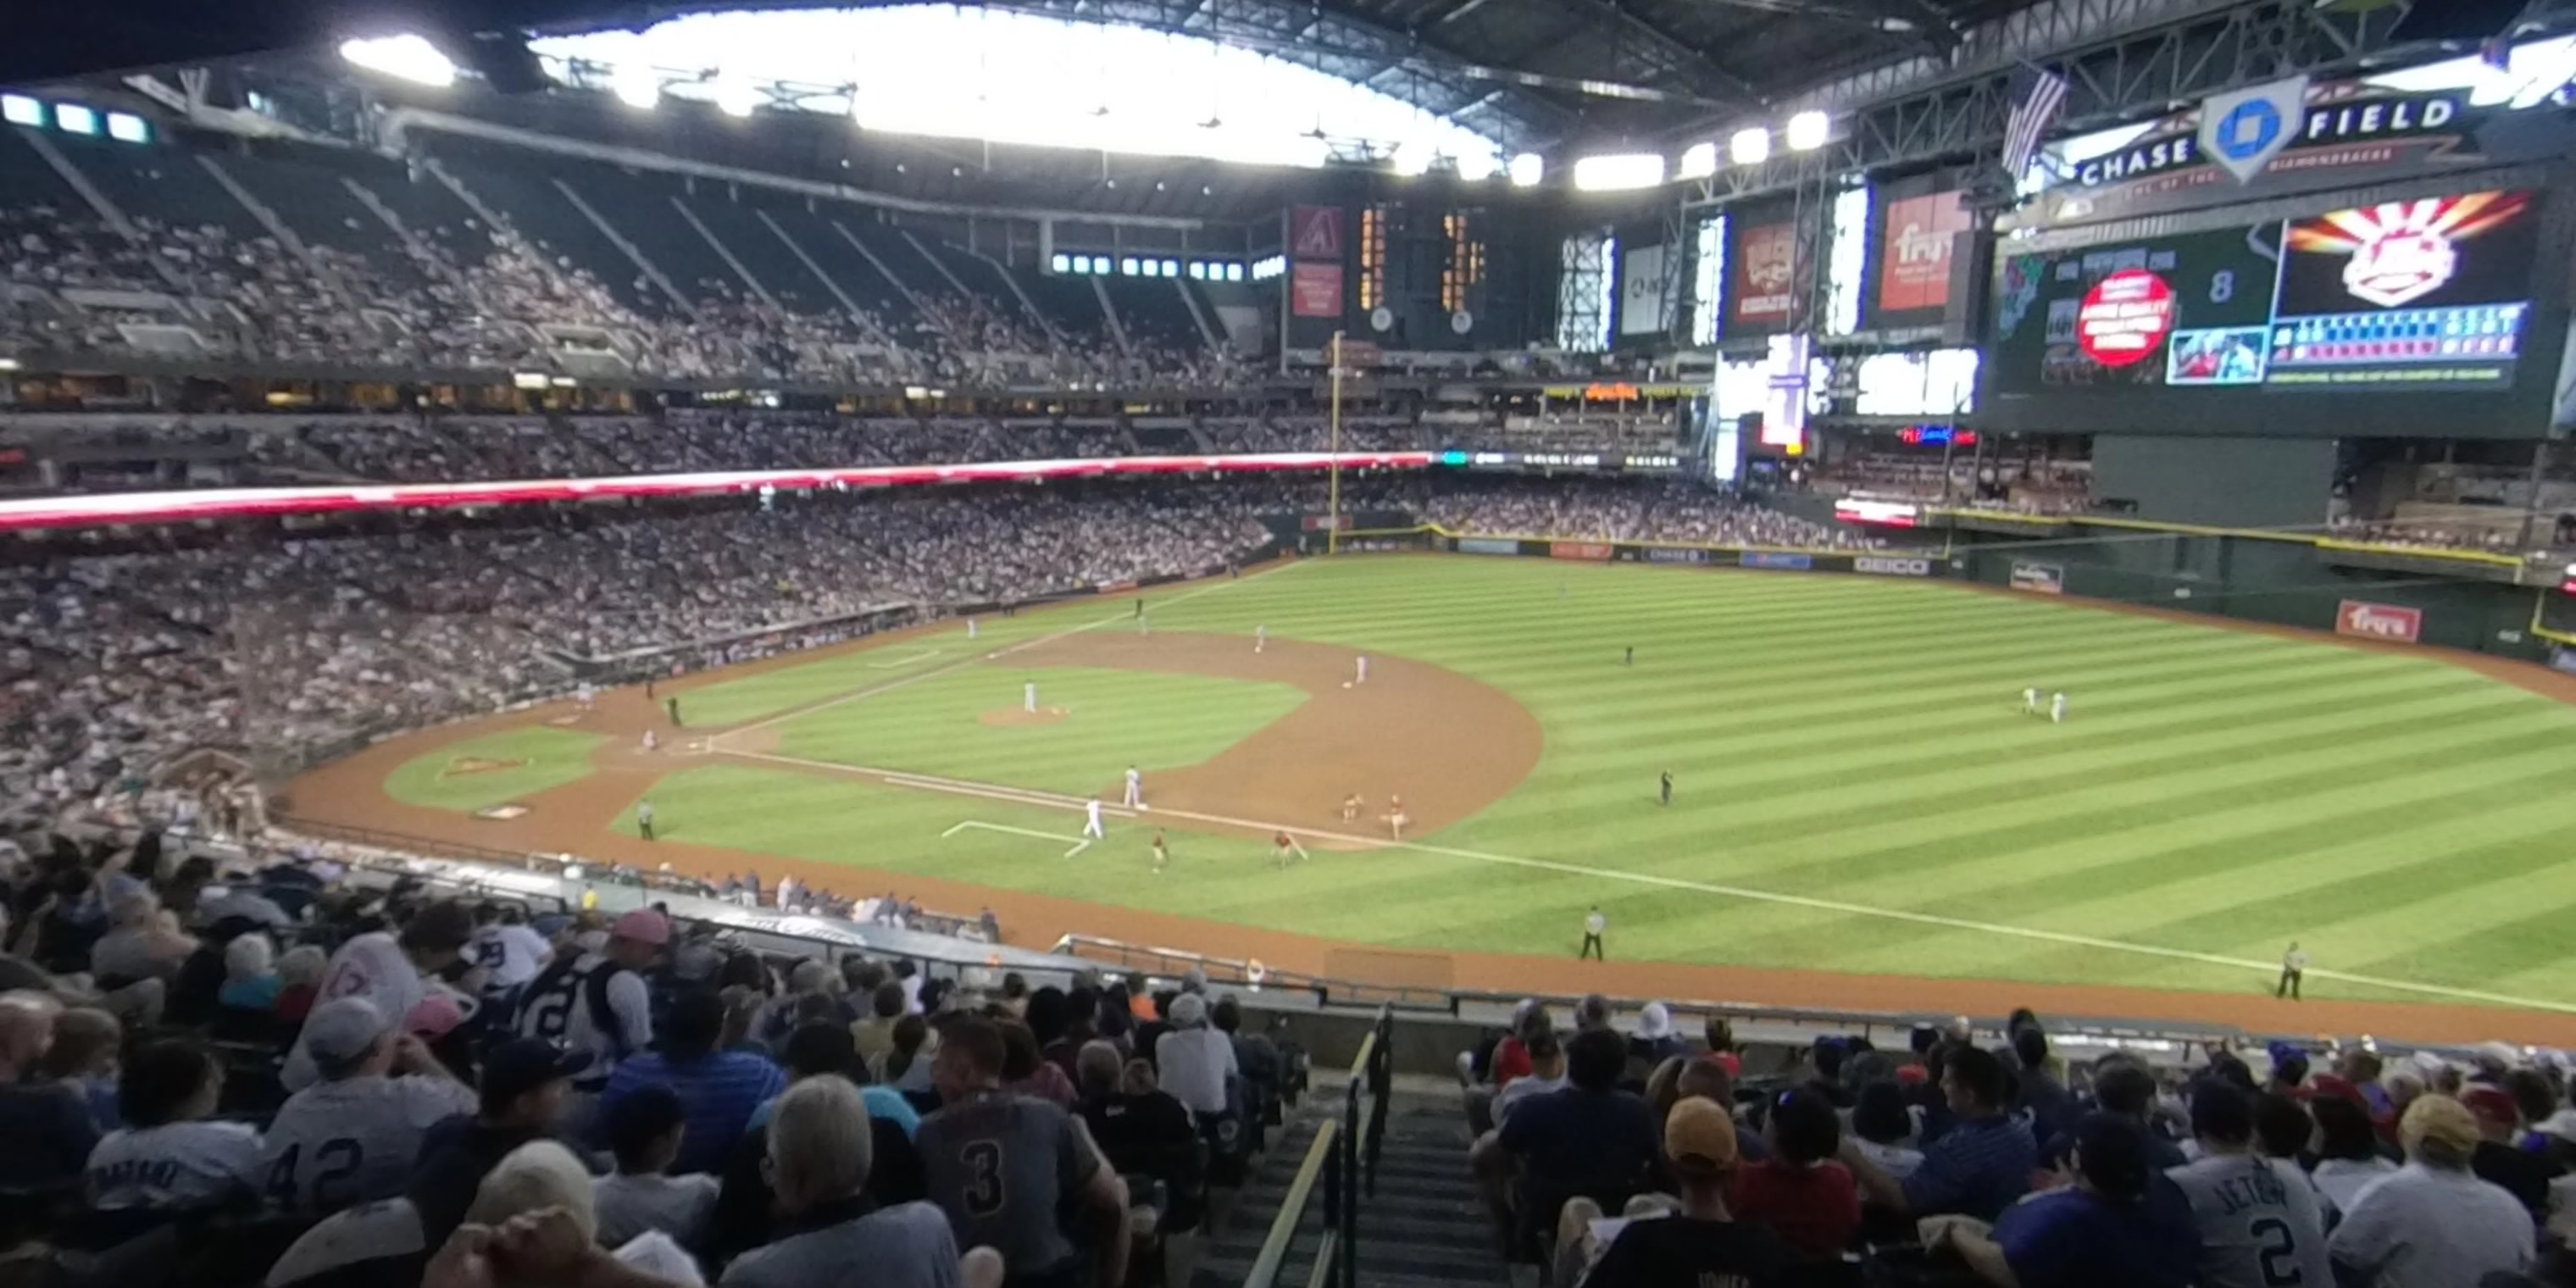 section 205 panoramic seat view  for baseball - chase field